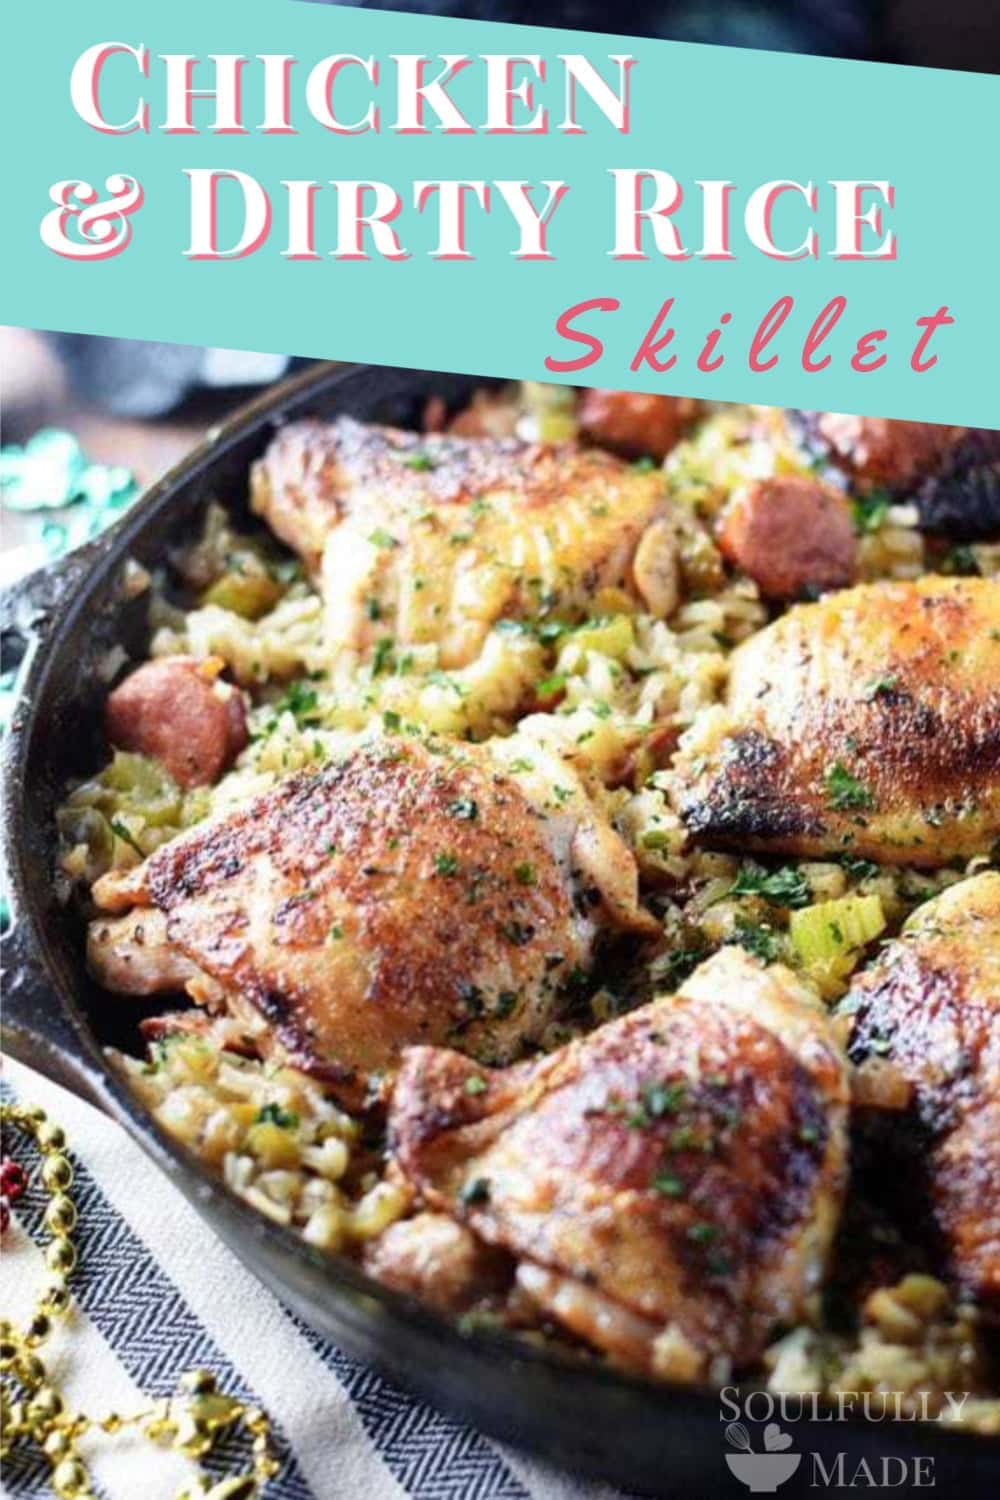 Chicken and Dirty Rice Skillet - Soulfully Made